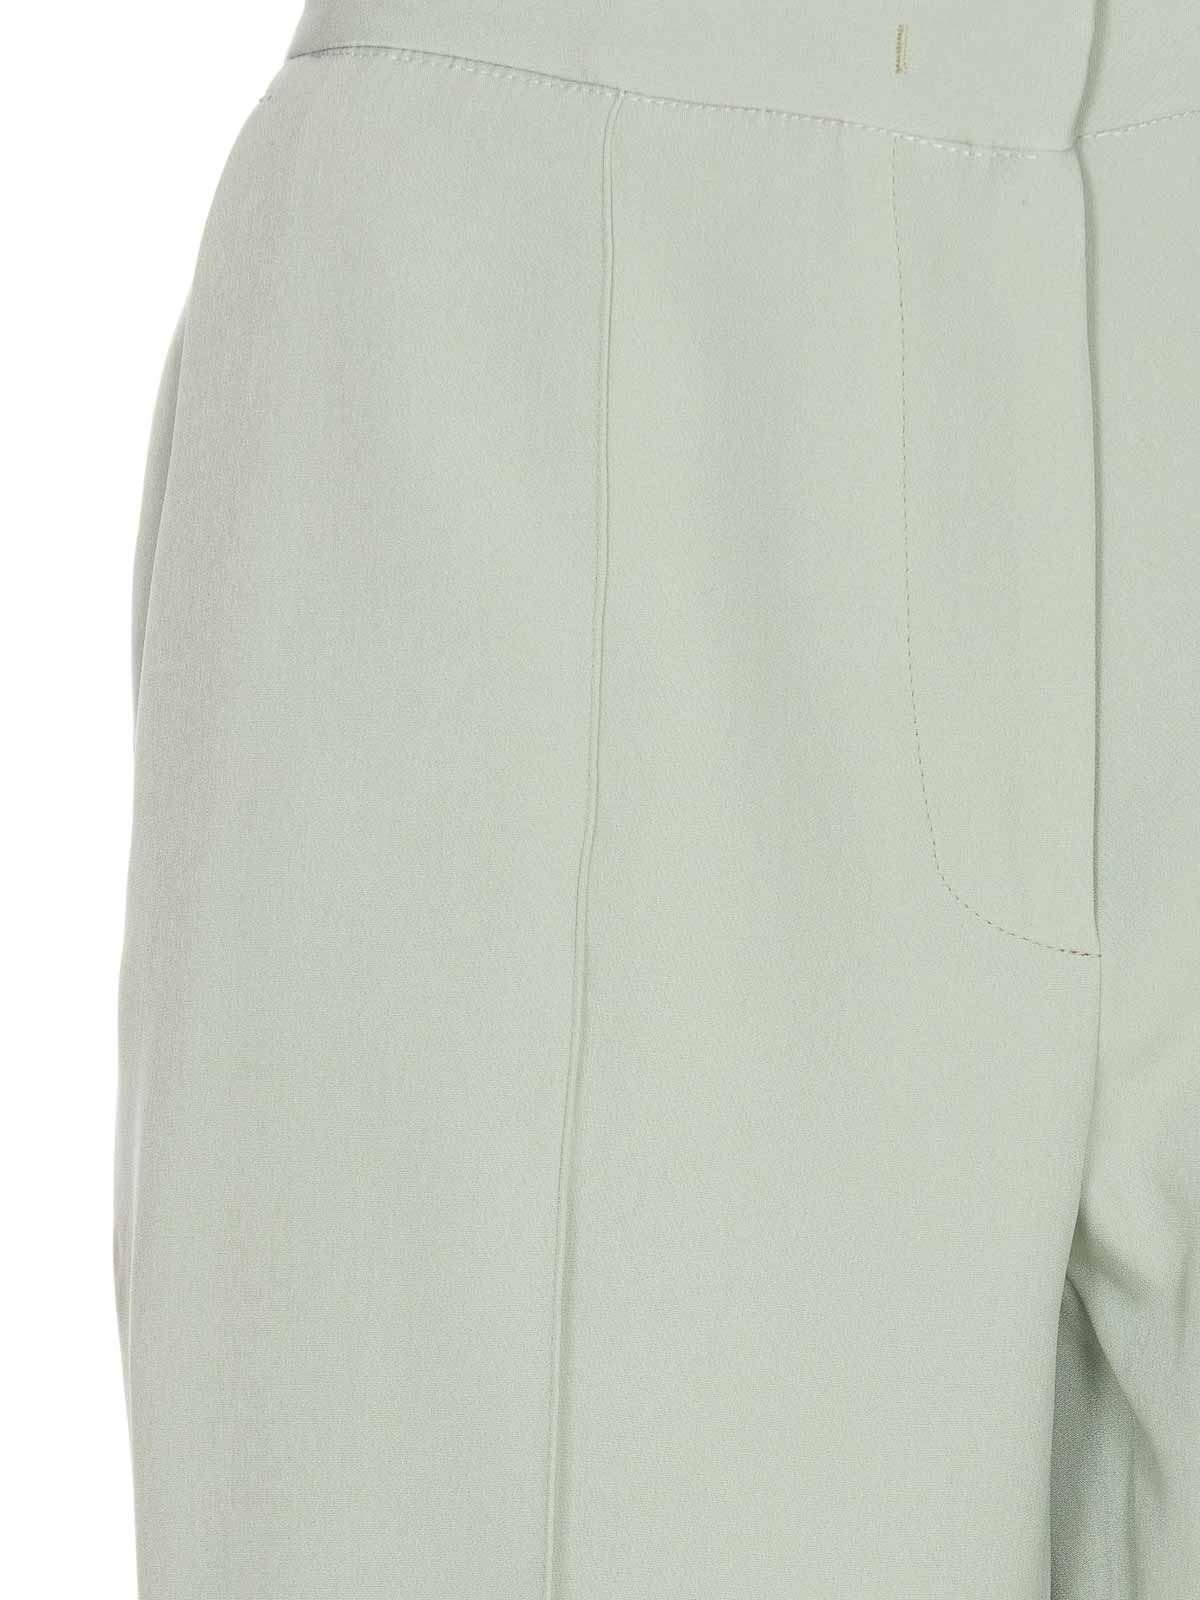 Shop Hinnominate Green Trousers Zip Hook Lateral Pockets